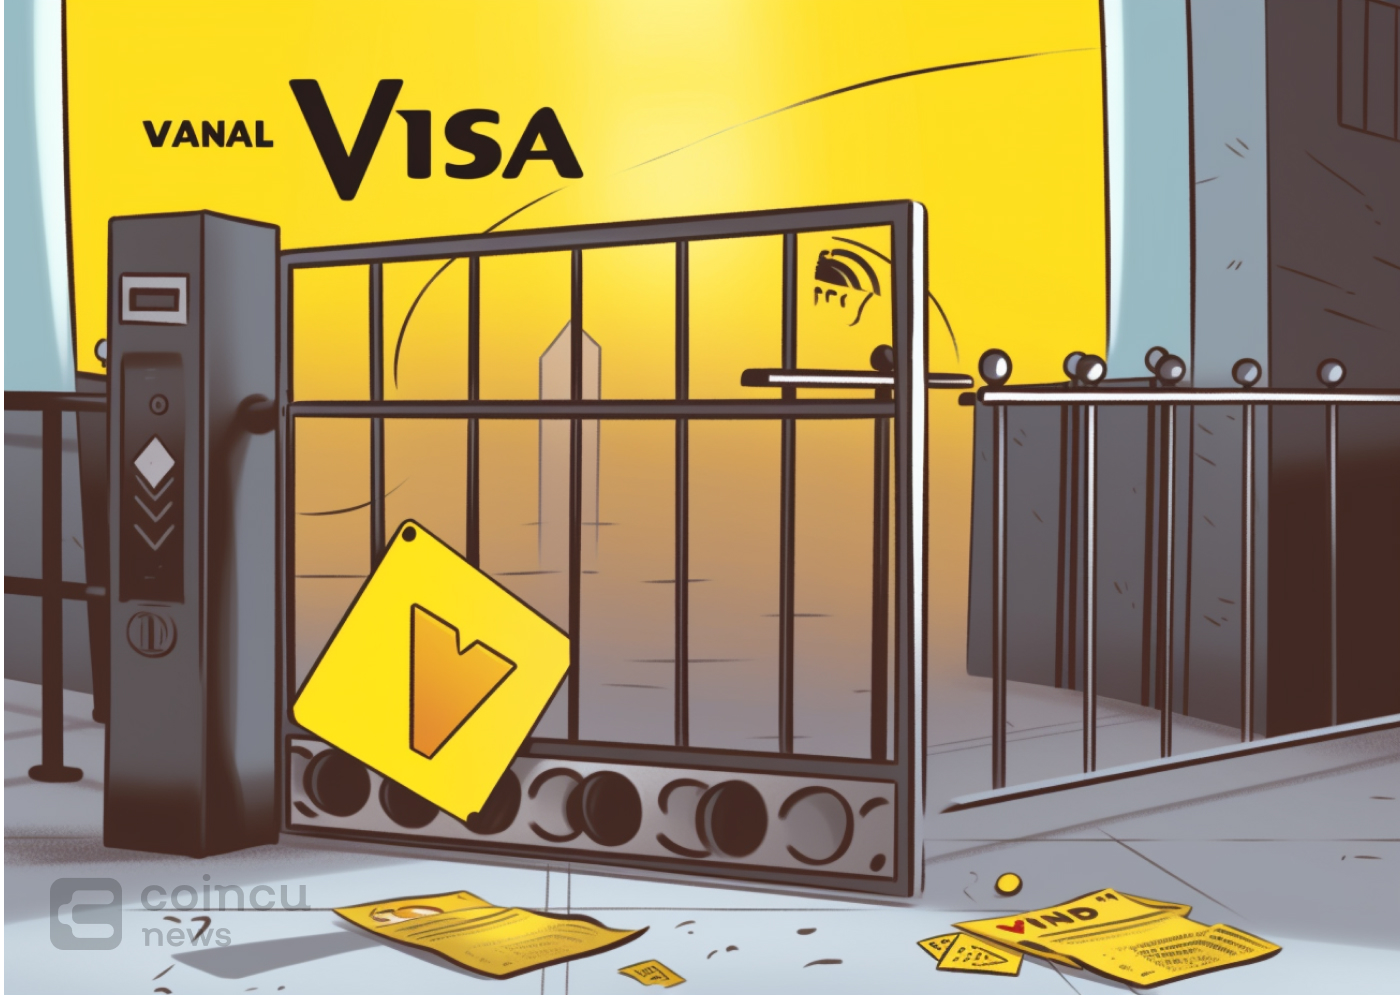 Binance Says Visa Has Stopped Issuing New Cards In Europe Since July